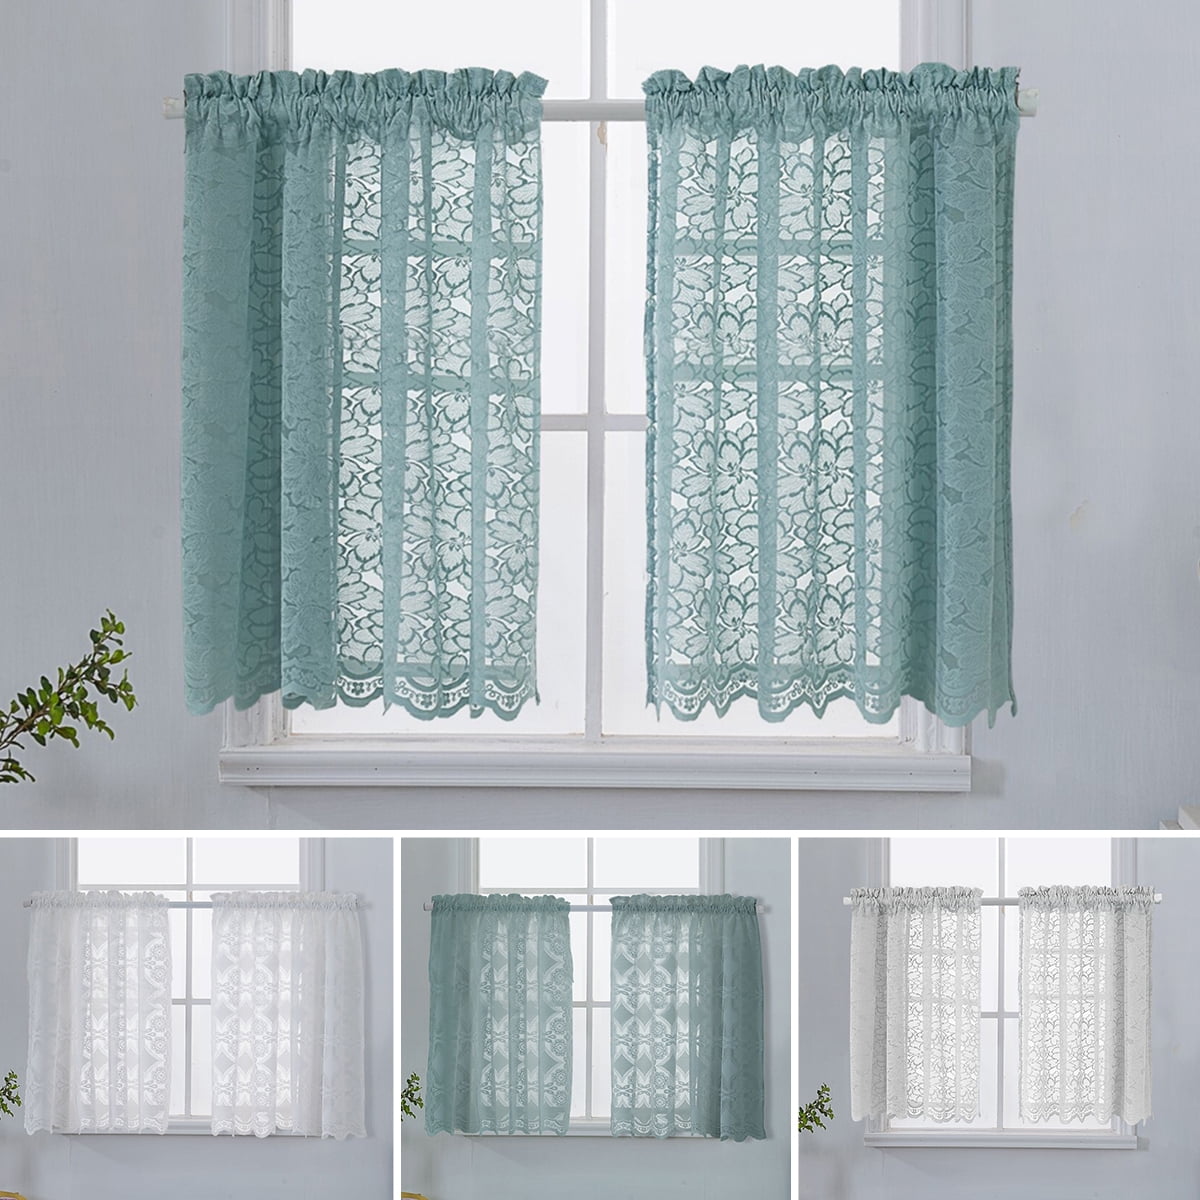 Net Lace Curtain Window Room Kitchen Caravan Slot Top Curtains Made to Measure 